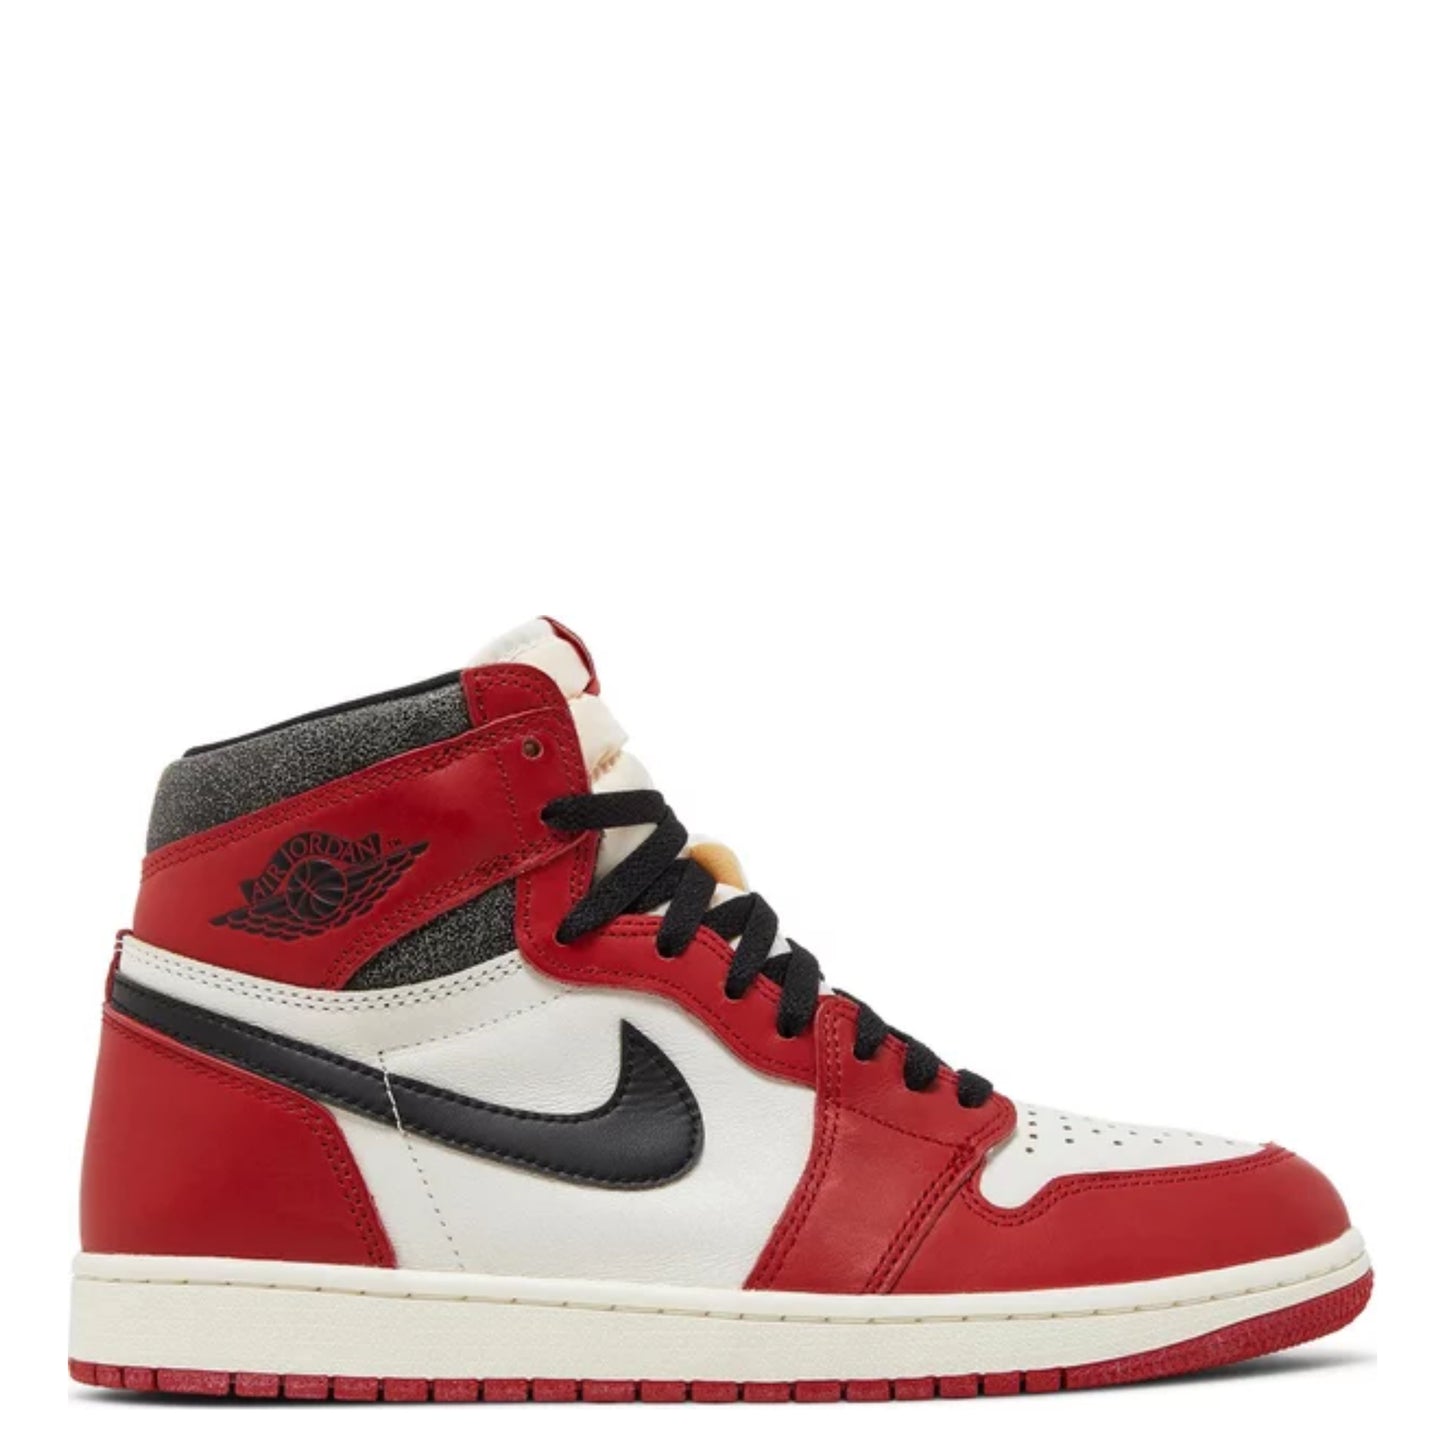 JORDAN 1 CHICAGO LOST AND FOUND